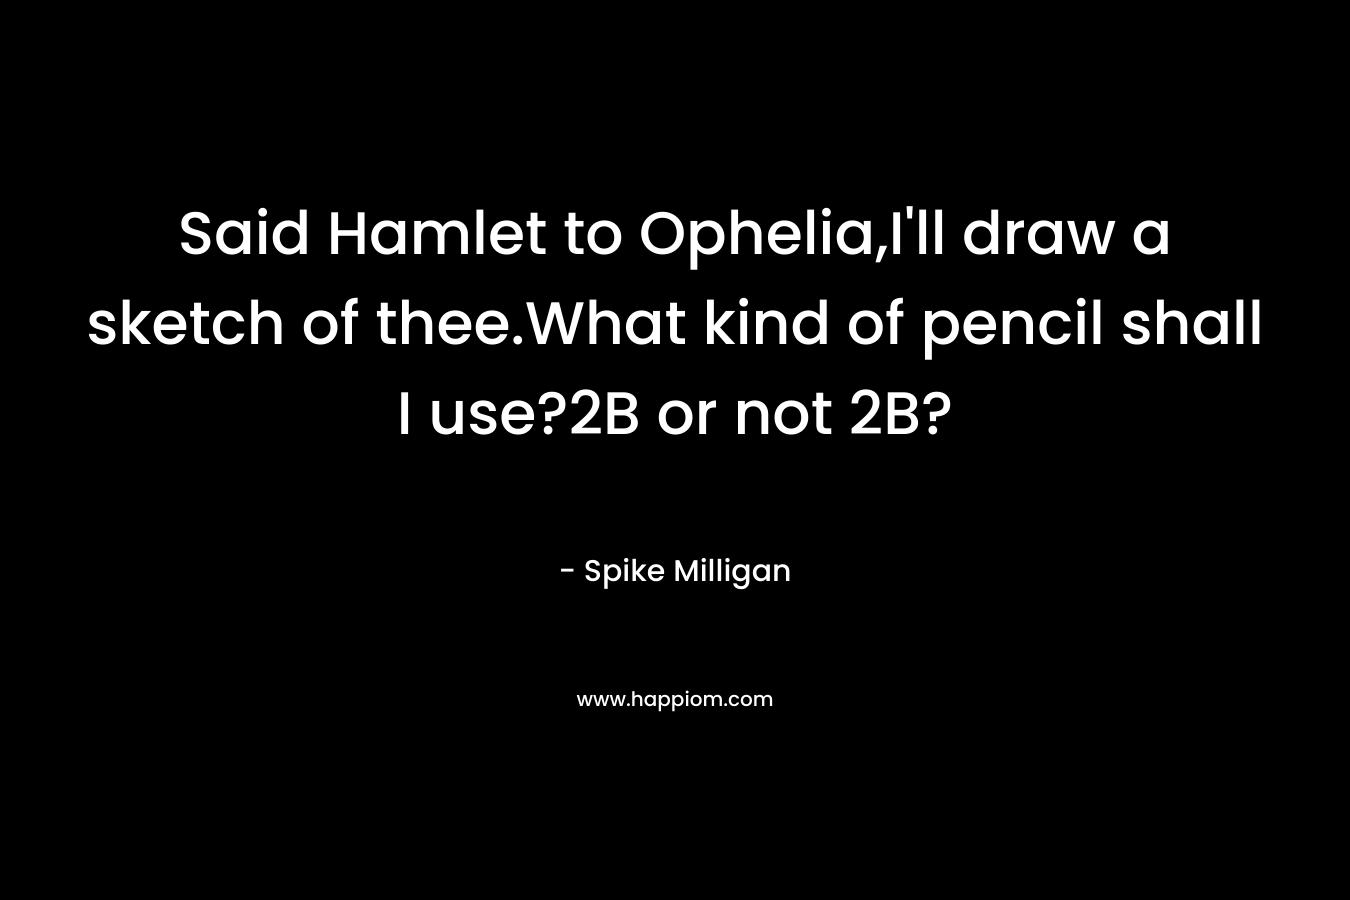 Said Hamlet to Ophelia,I’ll draw a sketch of thee.What kind of pencil shall I use?2B or not 2B? – Spike Milligan